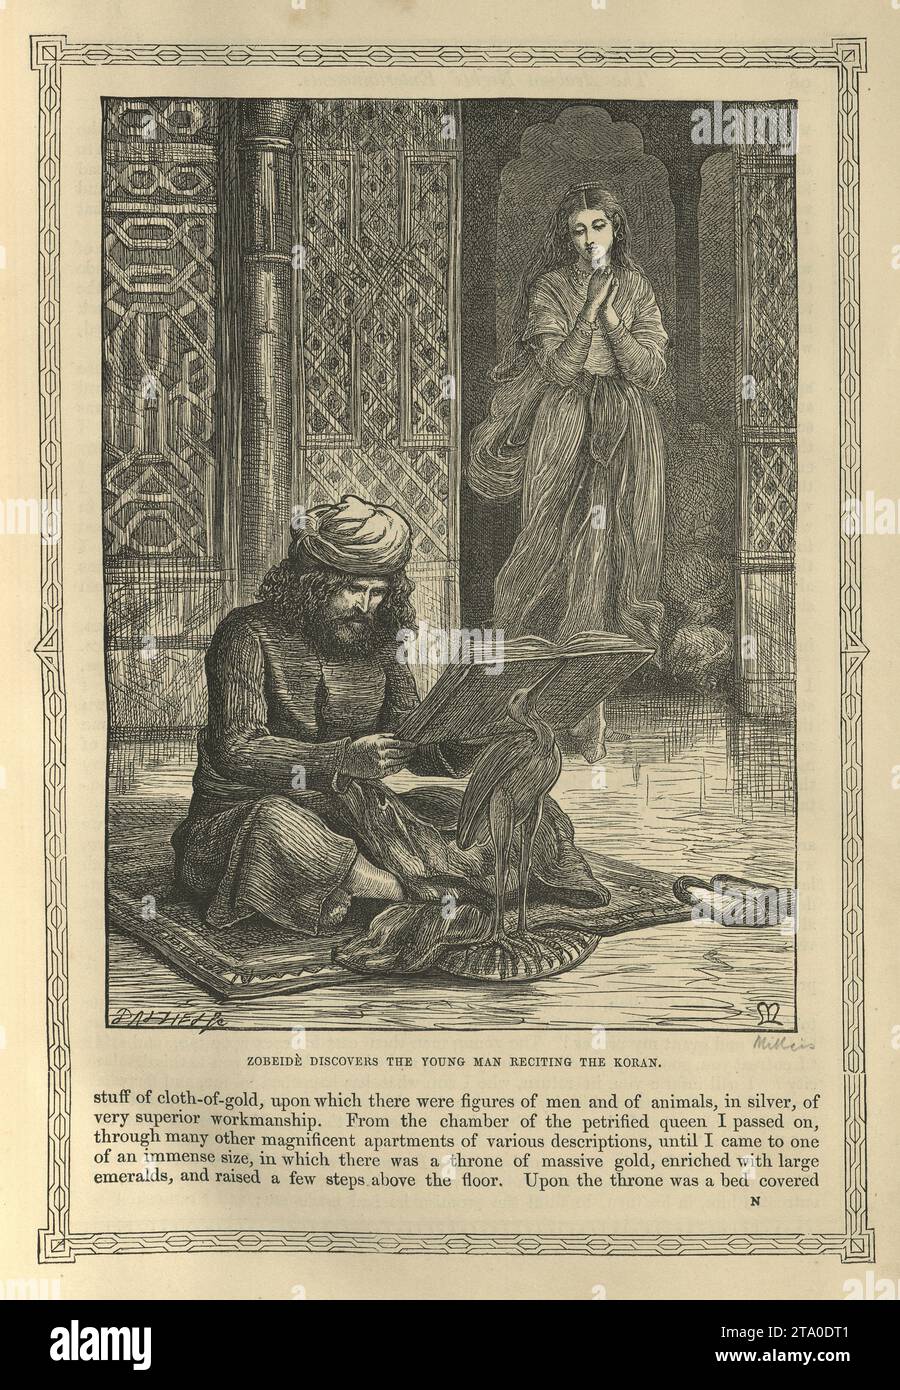 Vintage illustration One Thousand and One Nights, Zobeide discovers the Young man reciting the Koran, Arabian, Middle Eastern folktales, by The Brothers Dalziel Stock Photo